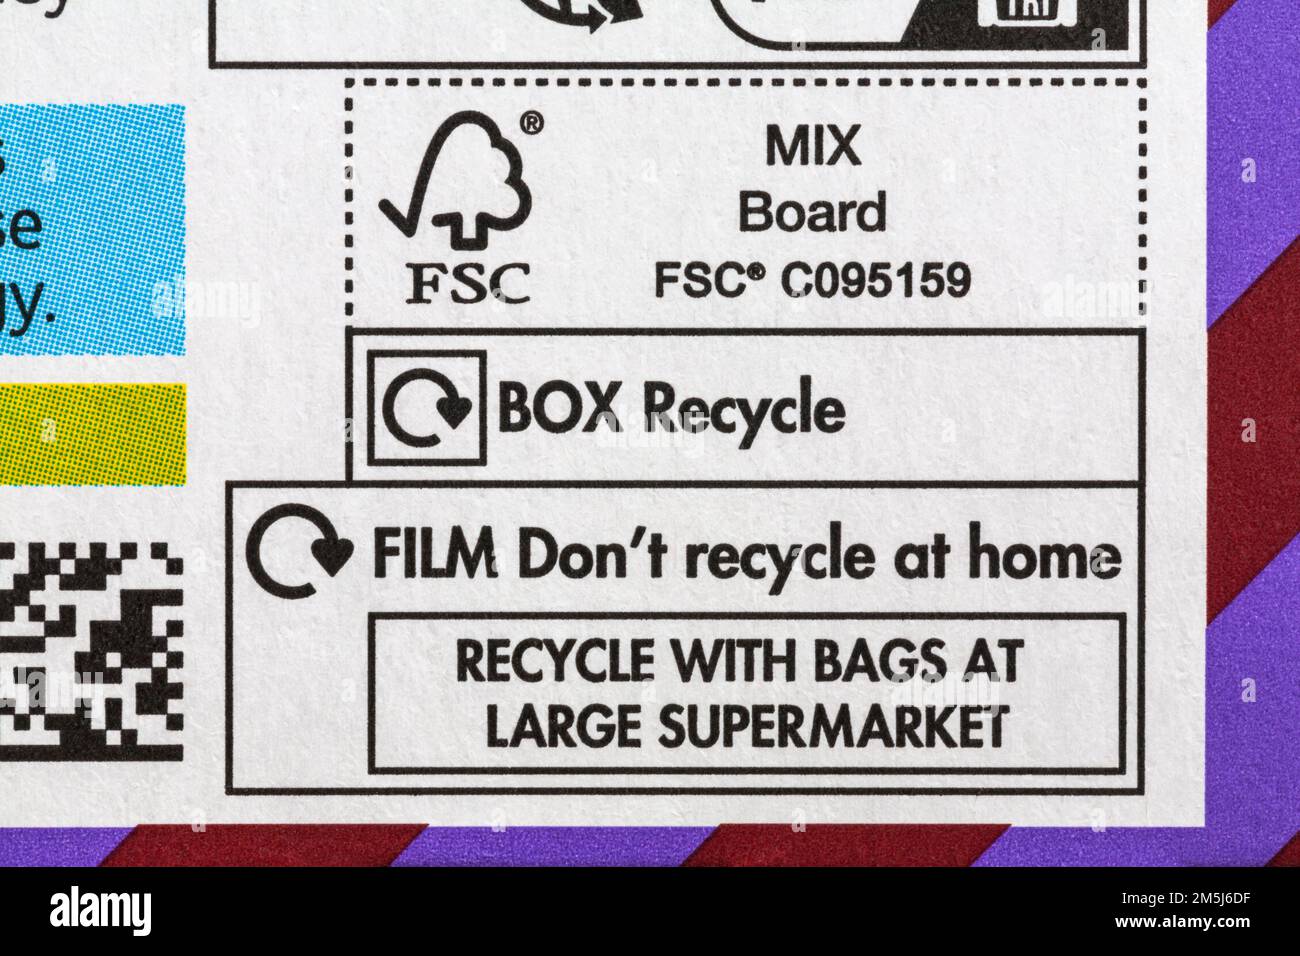 Recycling information, film don't recycle at home recycle with bags at large supermarket, box recycle FSC logo on Double Chocolate Panettone  from M&S Stock Photo